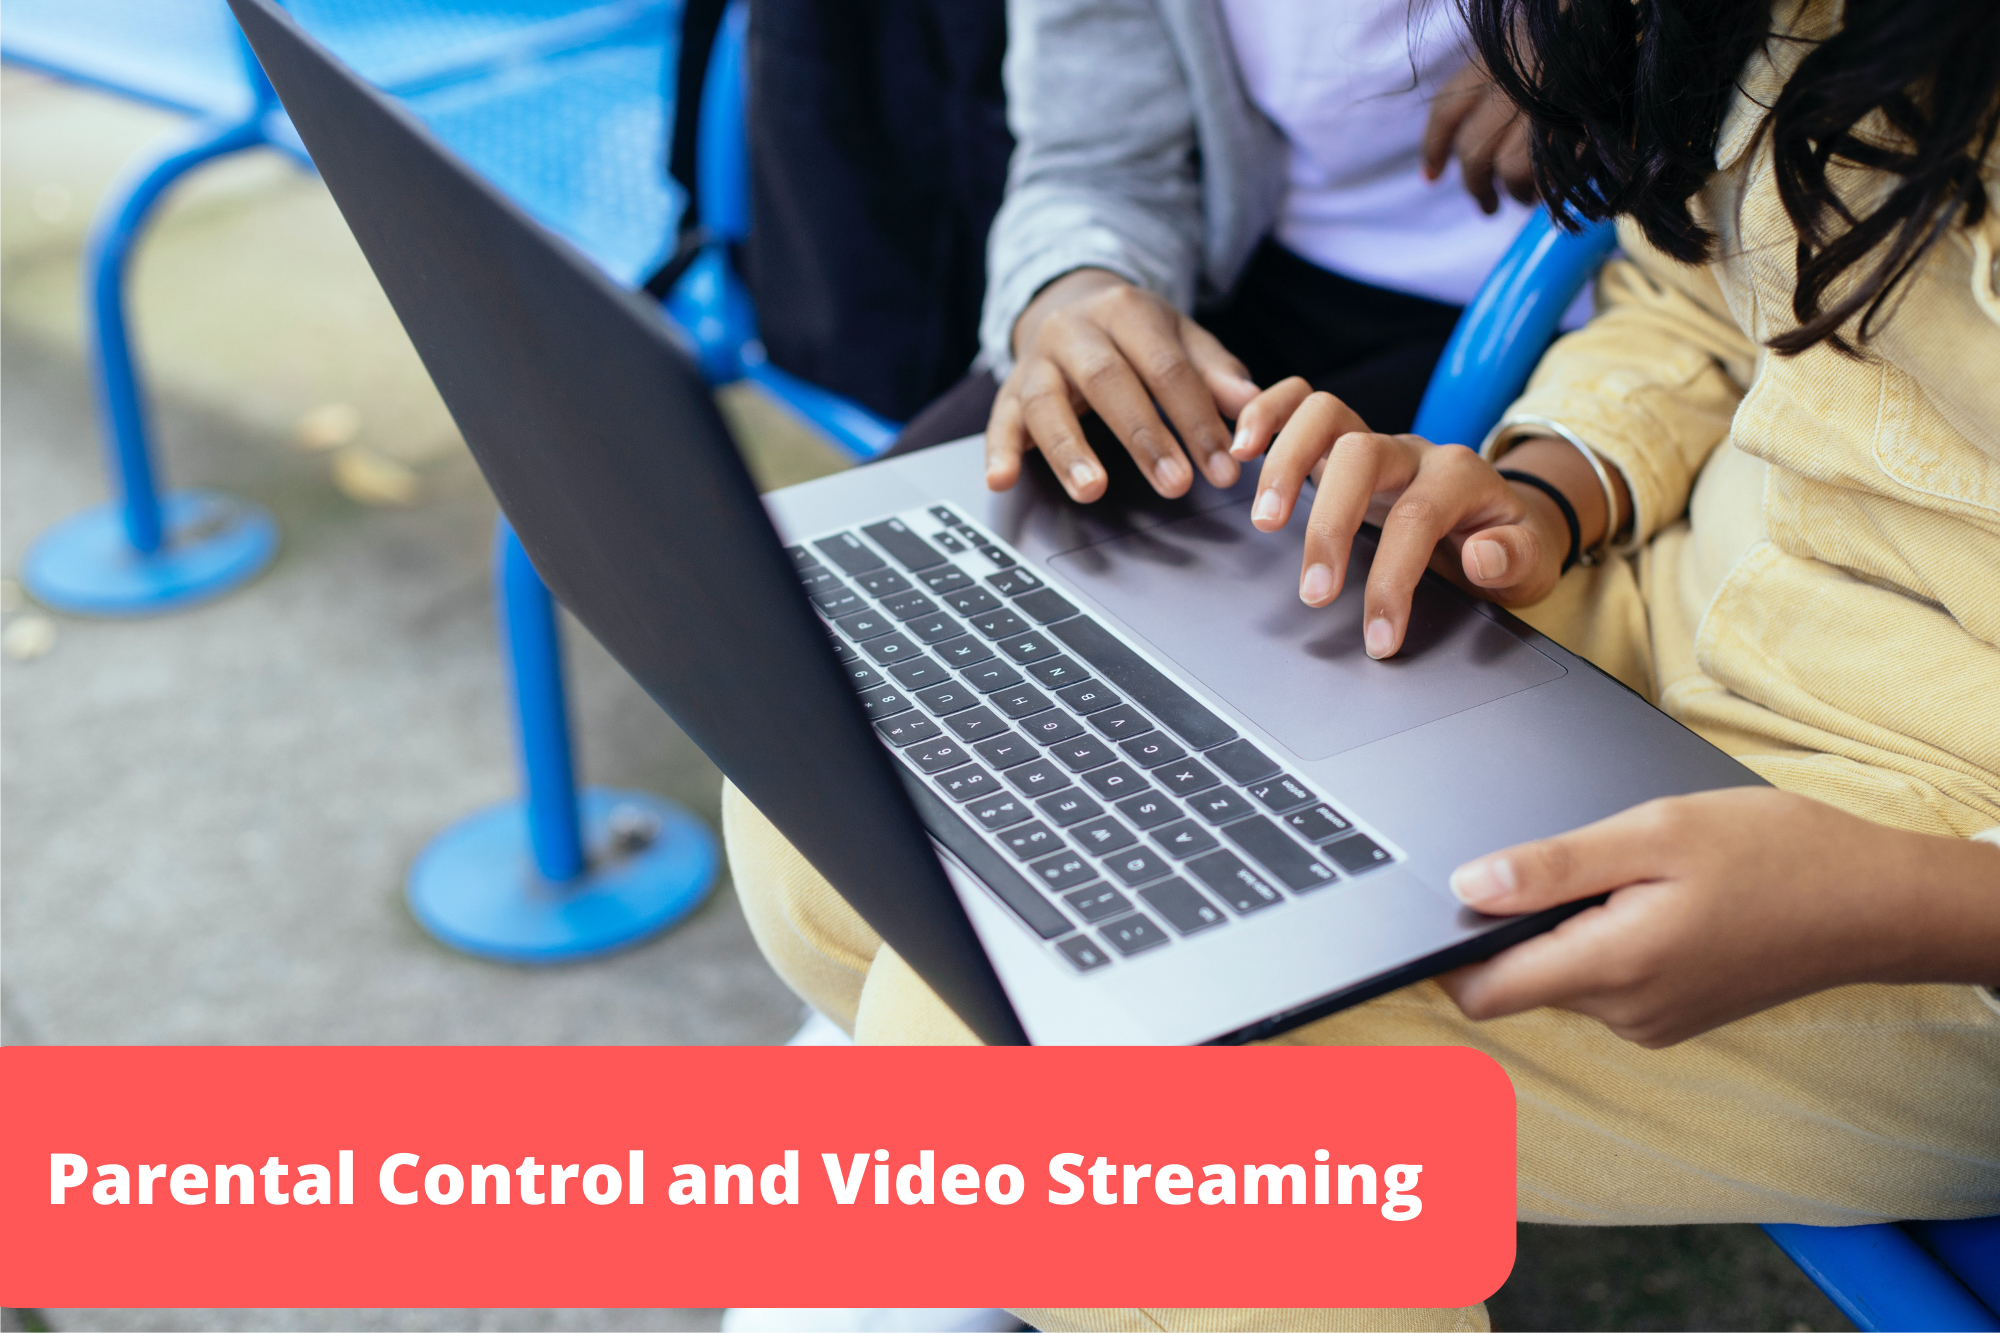 Parental Control and Video Streaming. Managing Content Choices